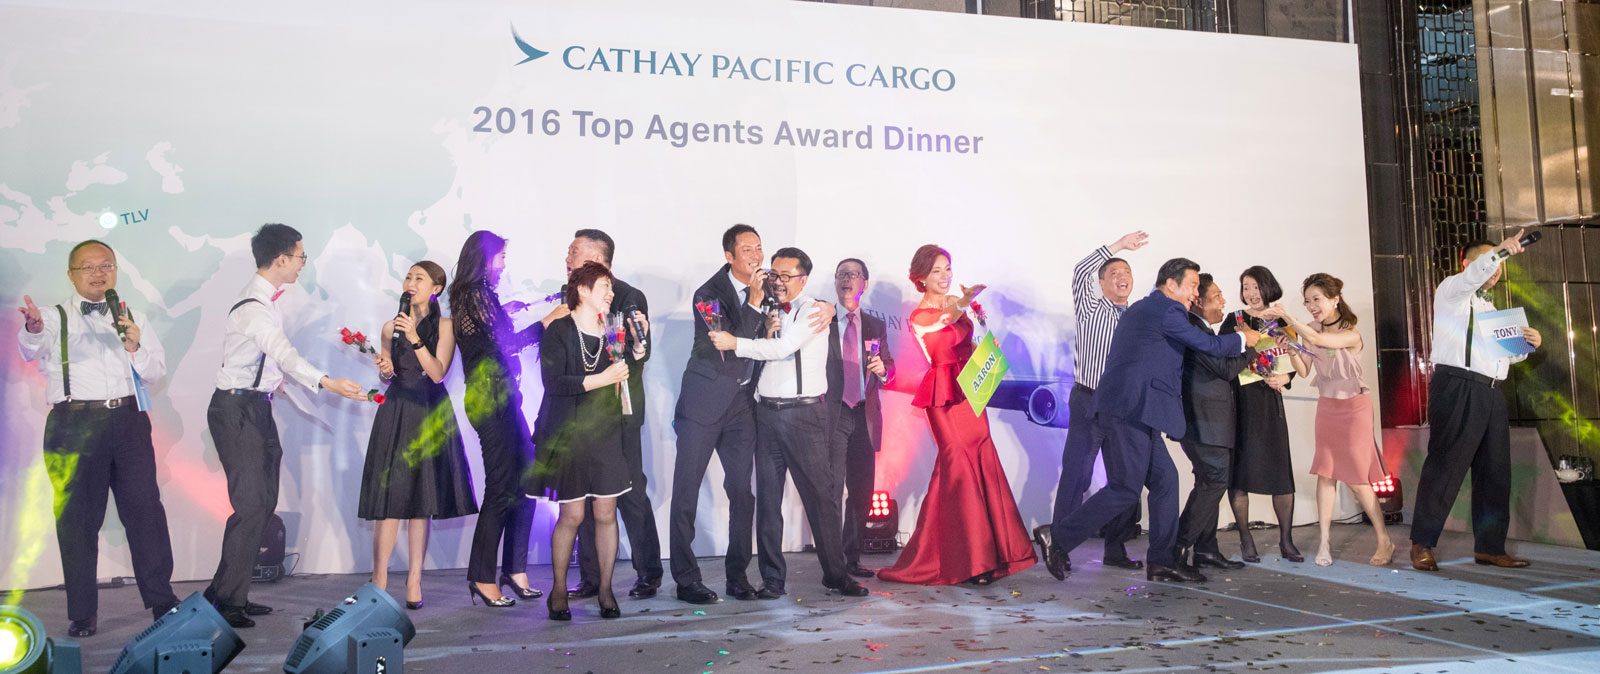 A chorus line: Cathay Pacific Cargo staff and cargo customers strut their stuff.